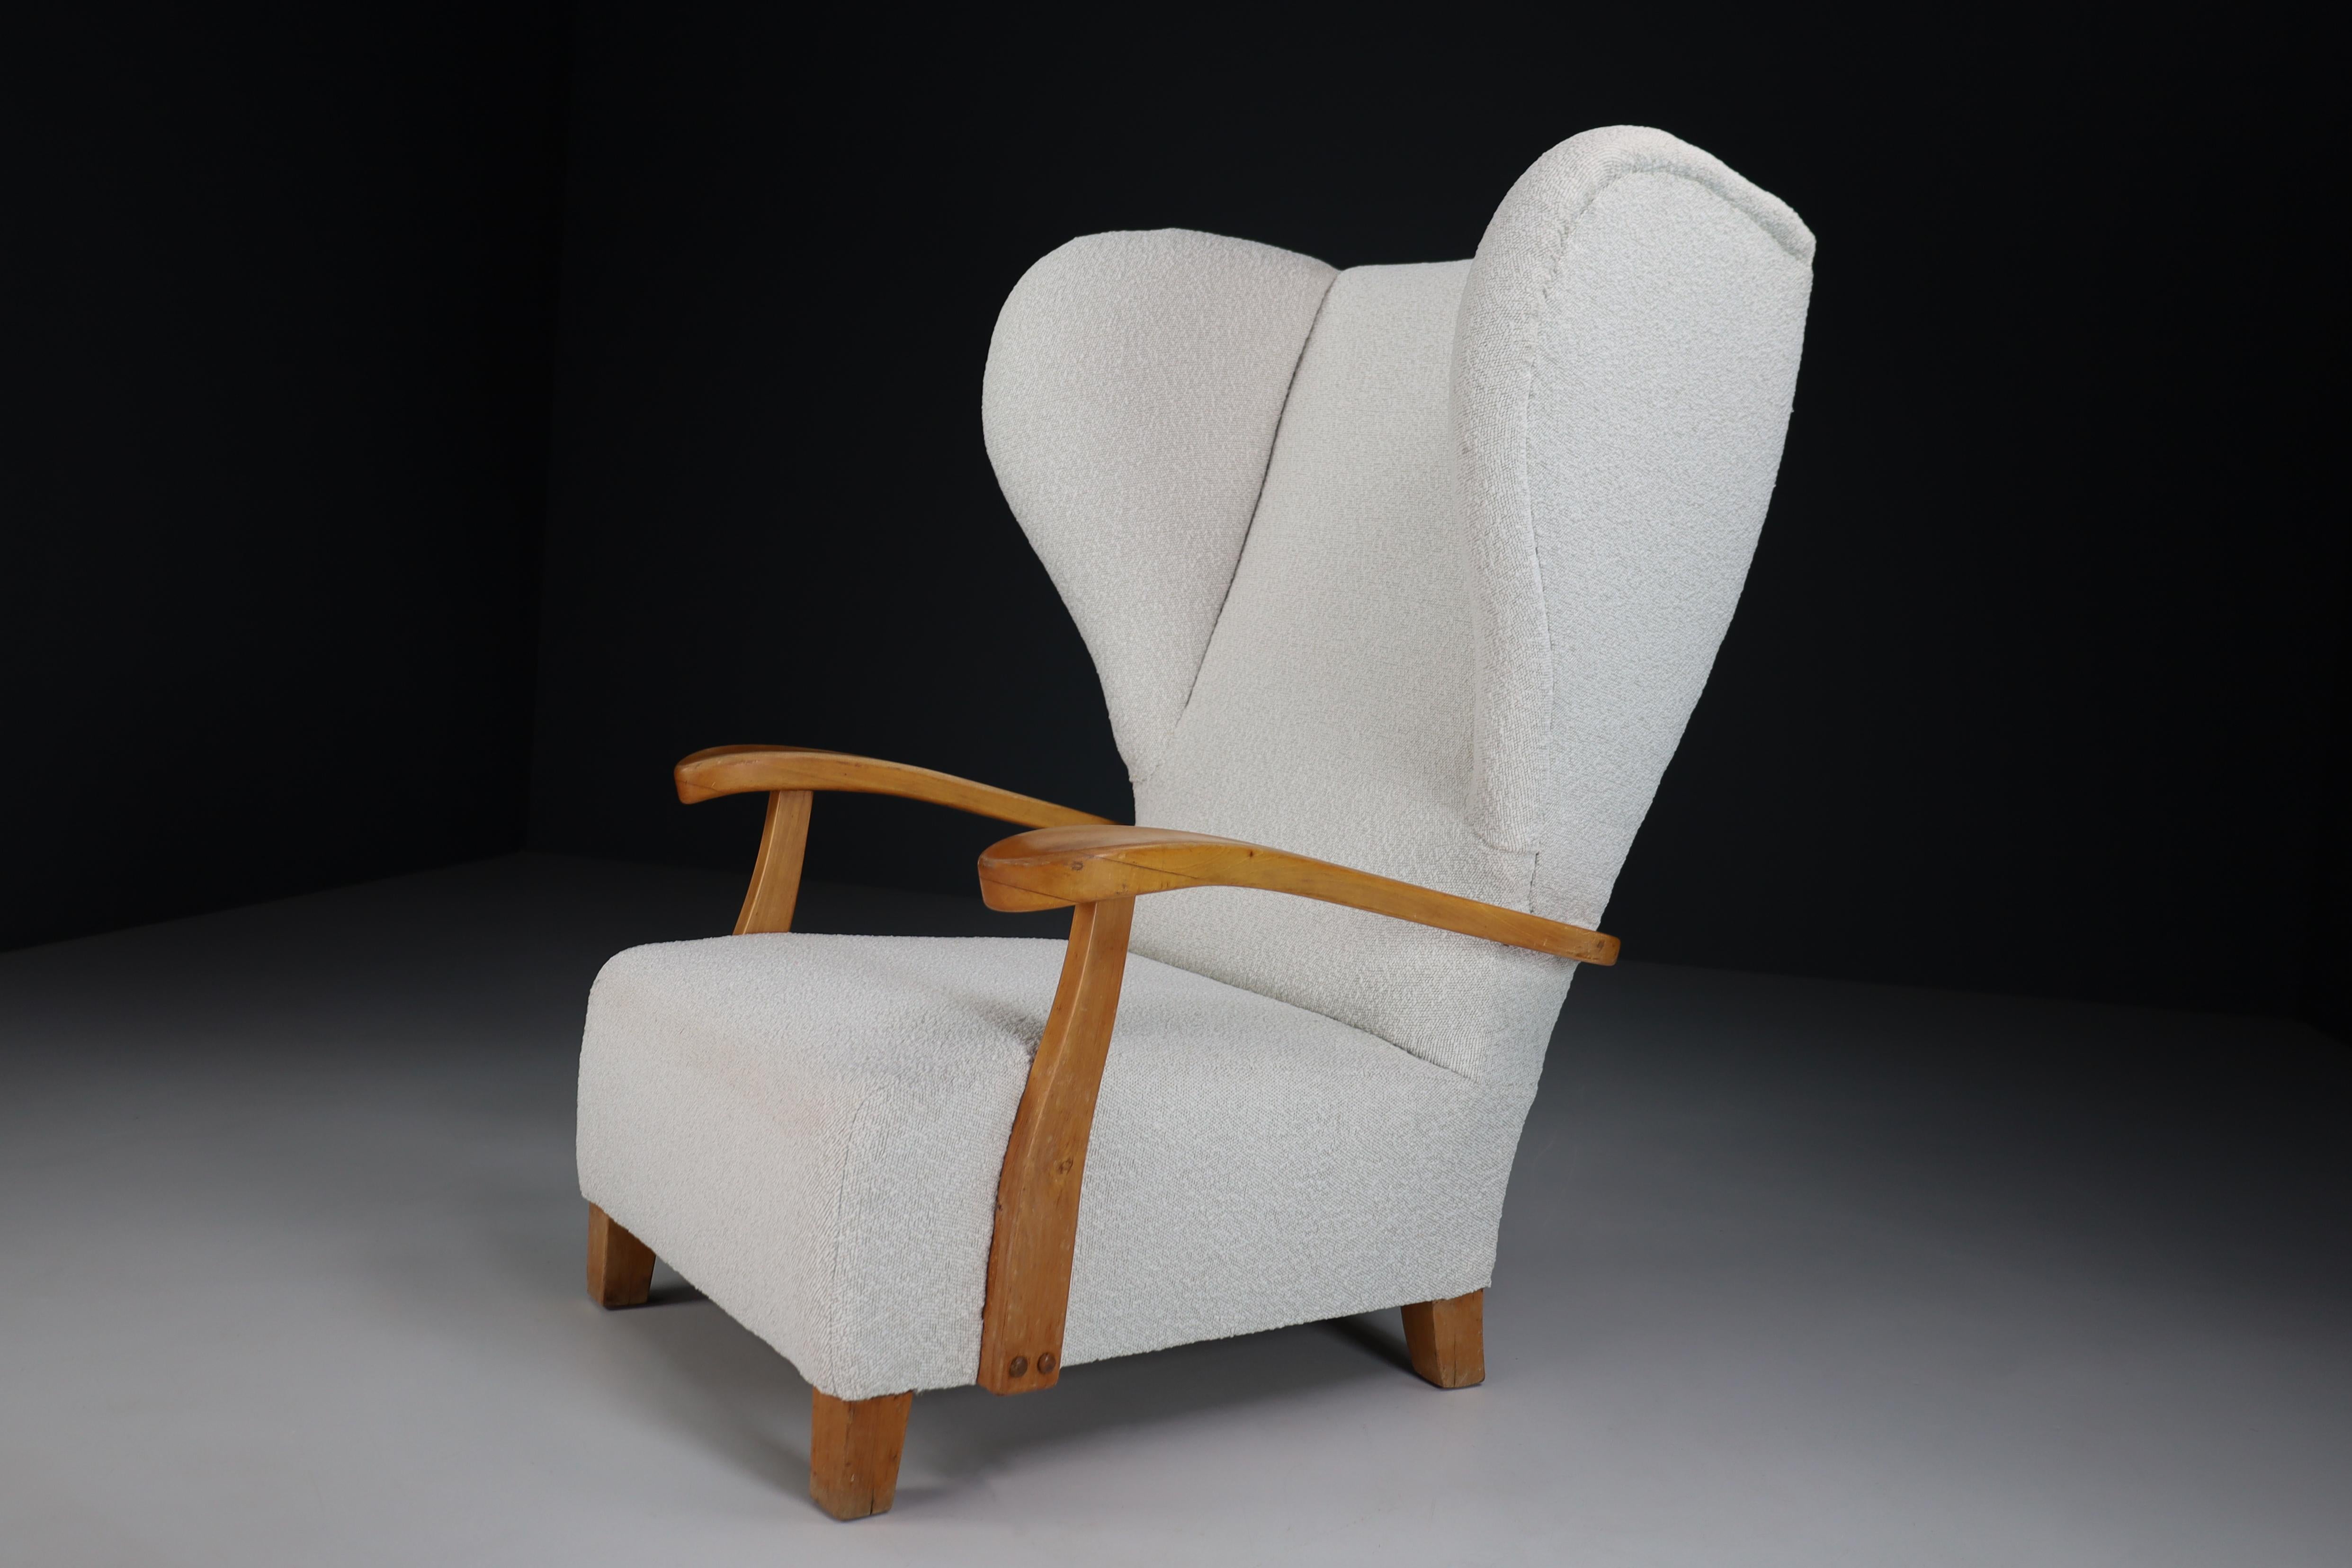 XXL Monumental Wingback Armchair in Walnut and Bouclé Fabric, France 1930s For Sale 5